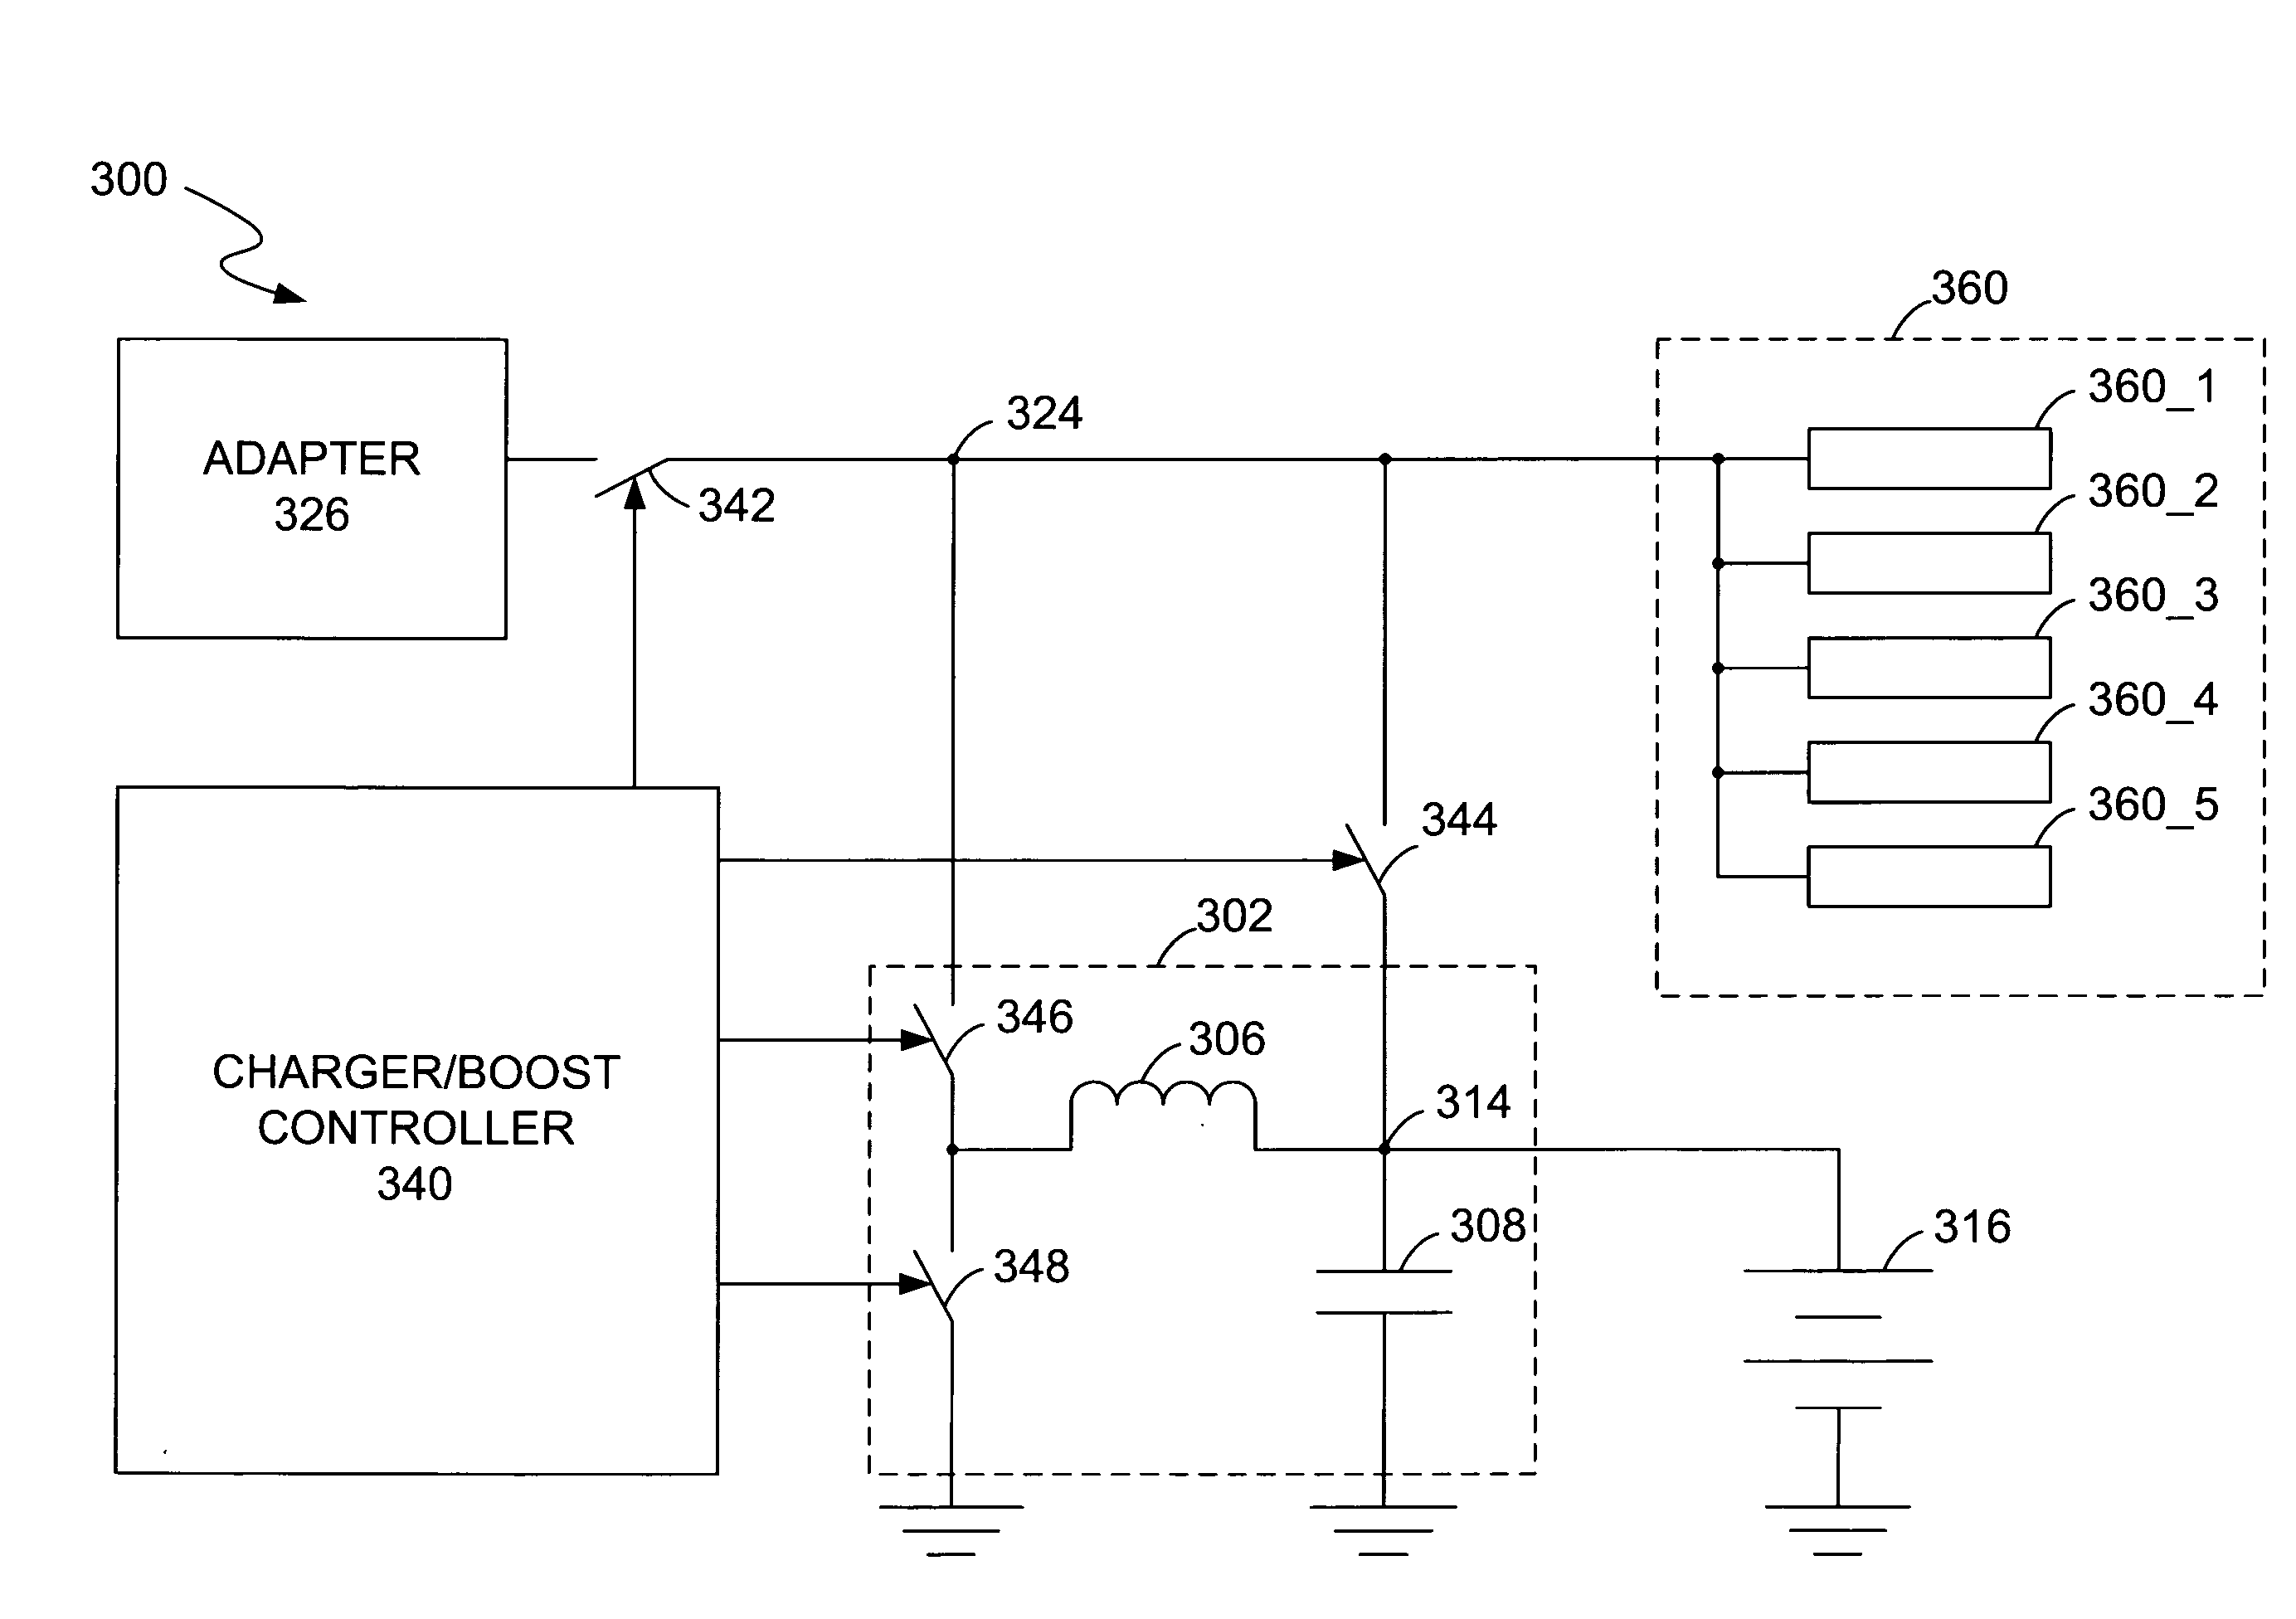 Power management system with charger/boost controller